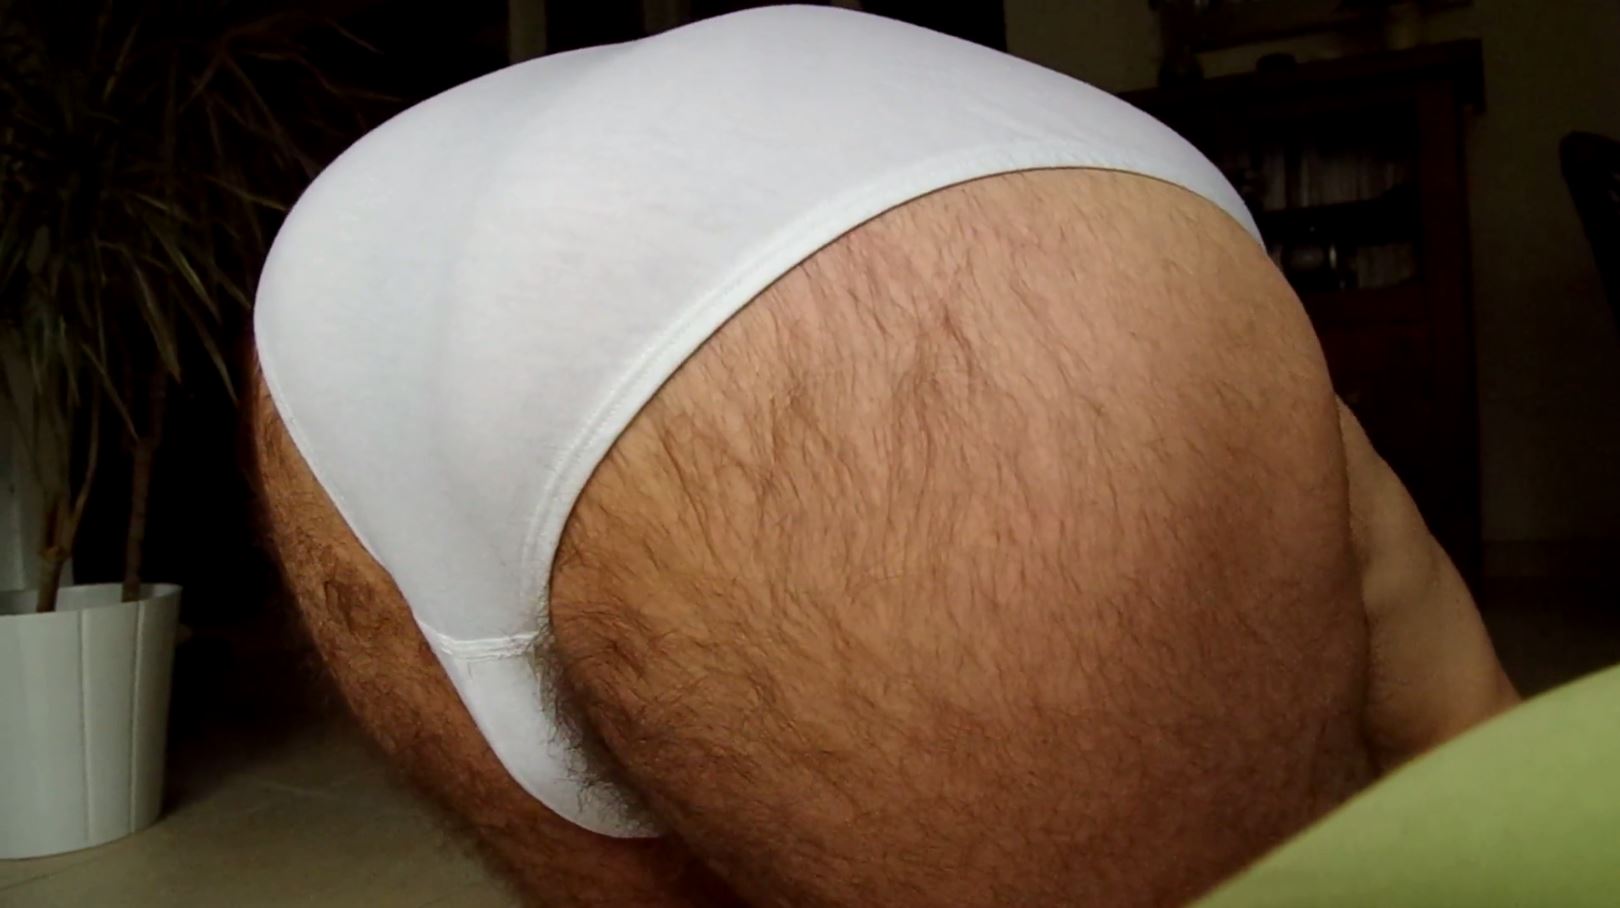 My new white panty needed to be filled